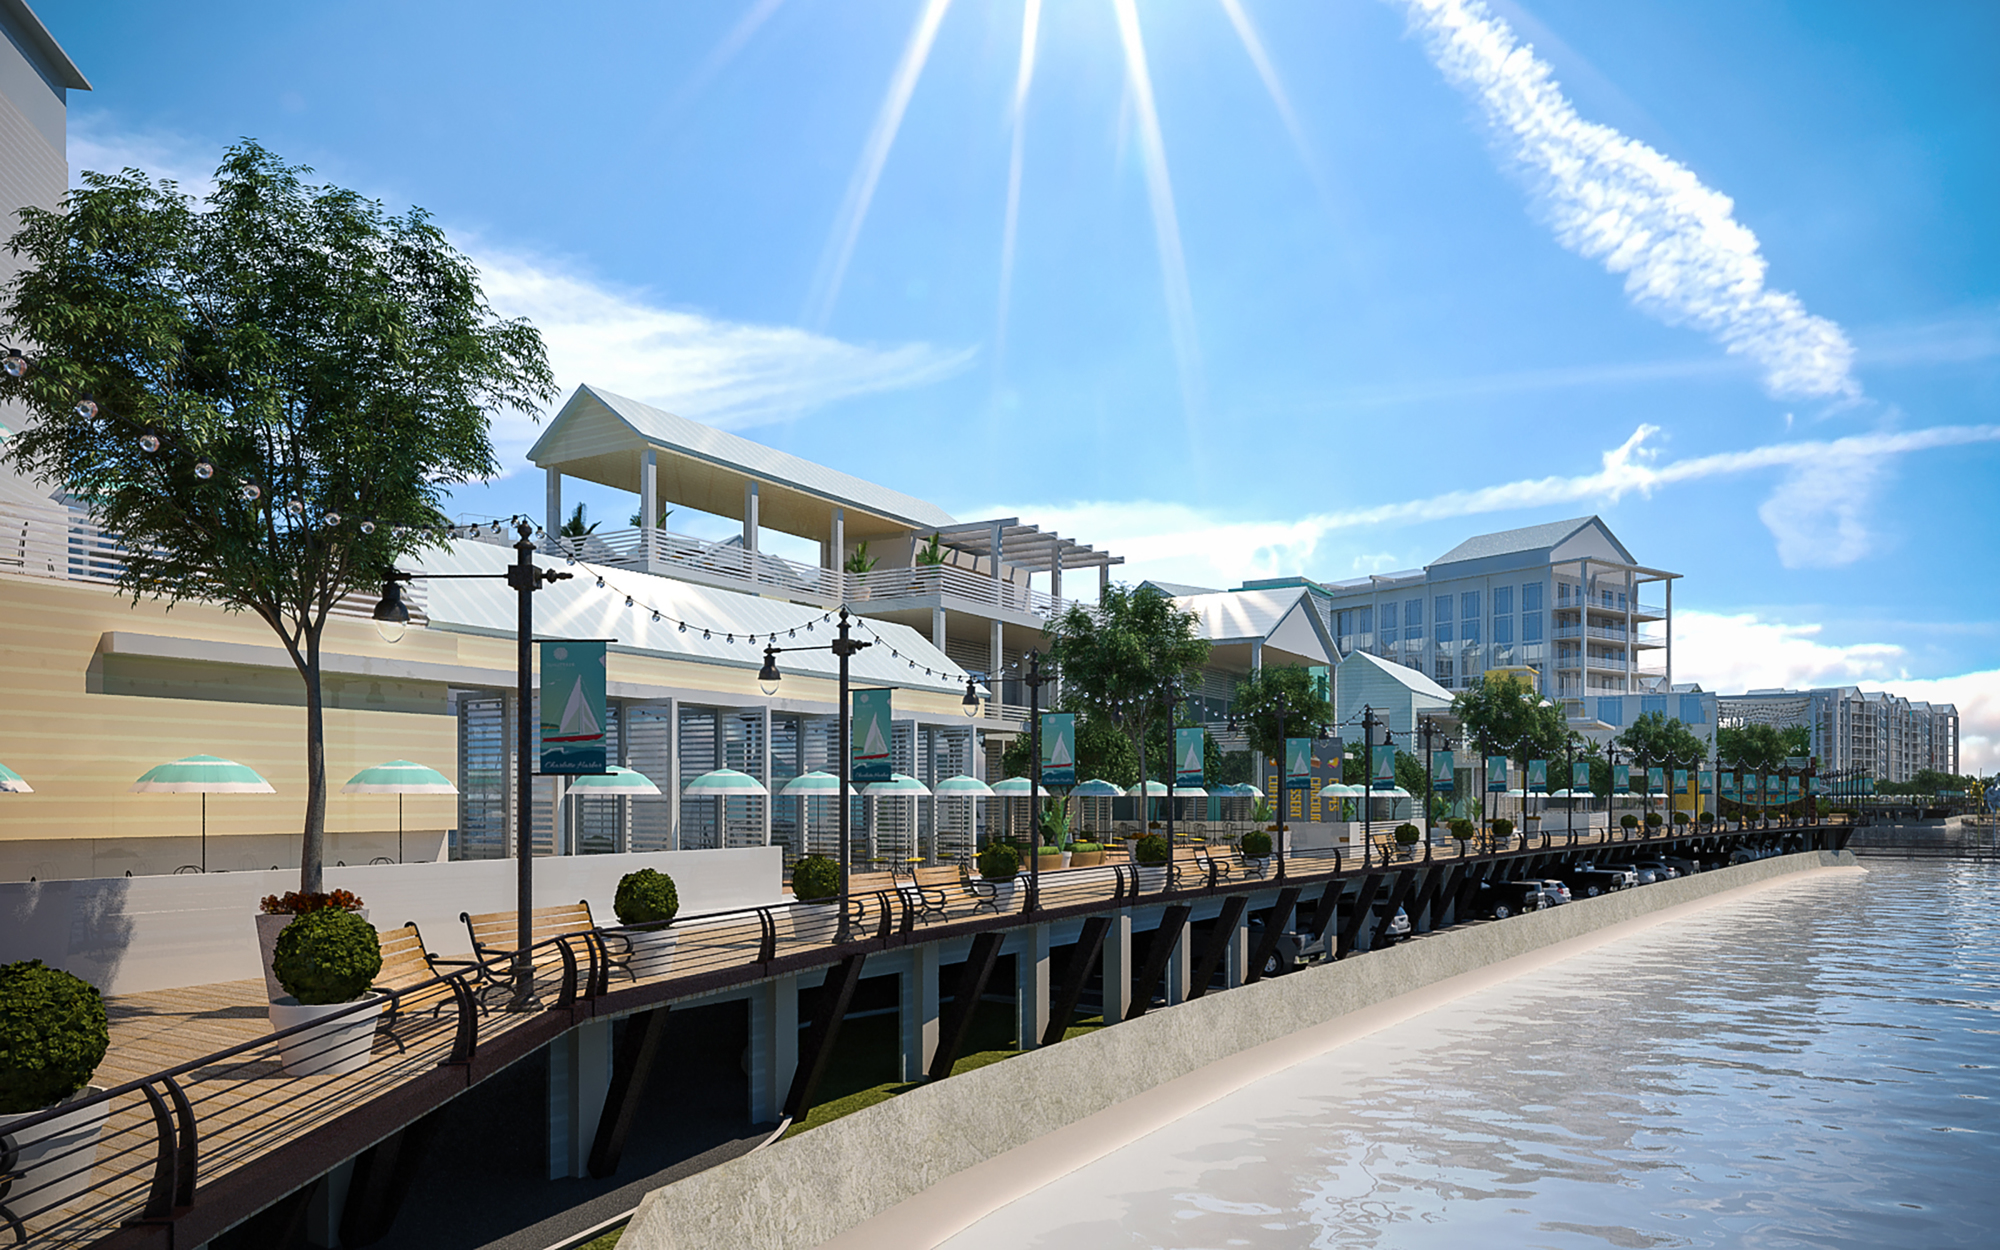 The planned Sunseeker Resort will feature waterfront vistas.